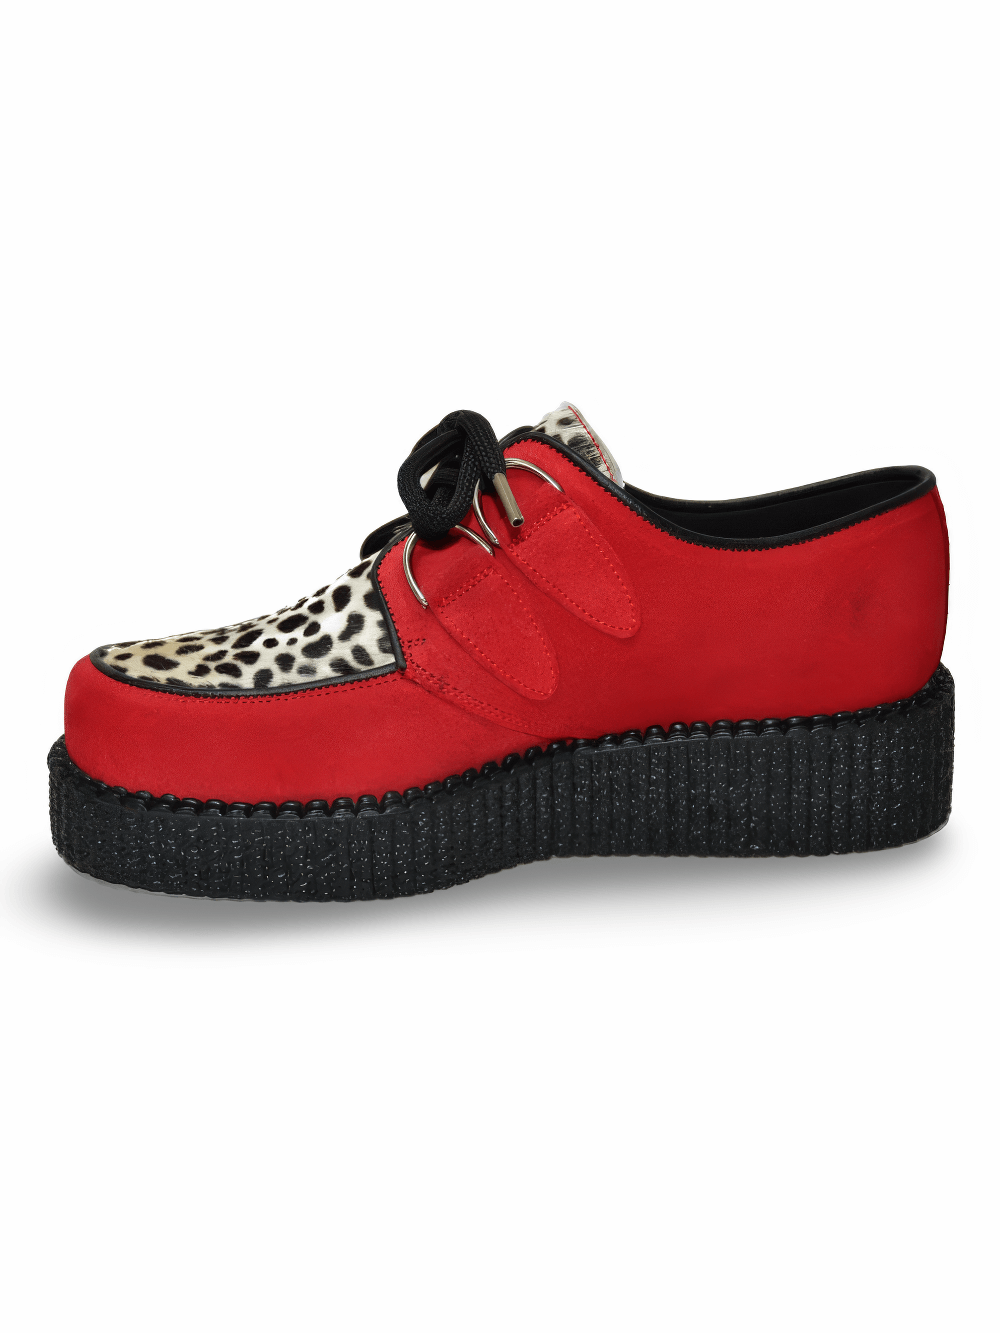 Bold Unisex Red Lace-Up Creepers in Suede and Fur